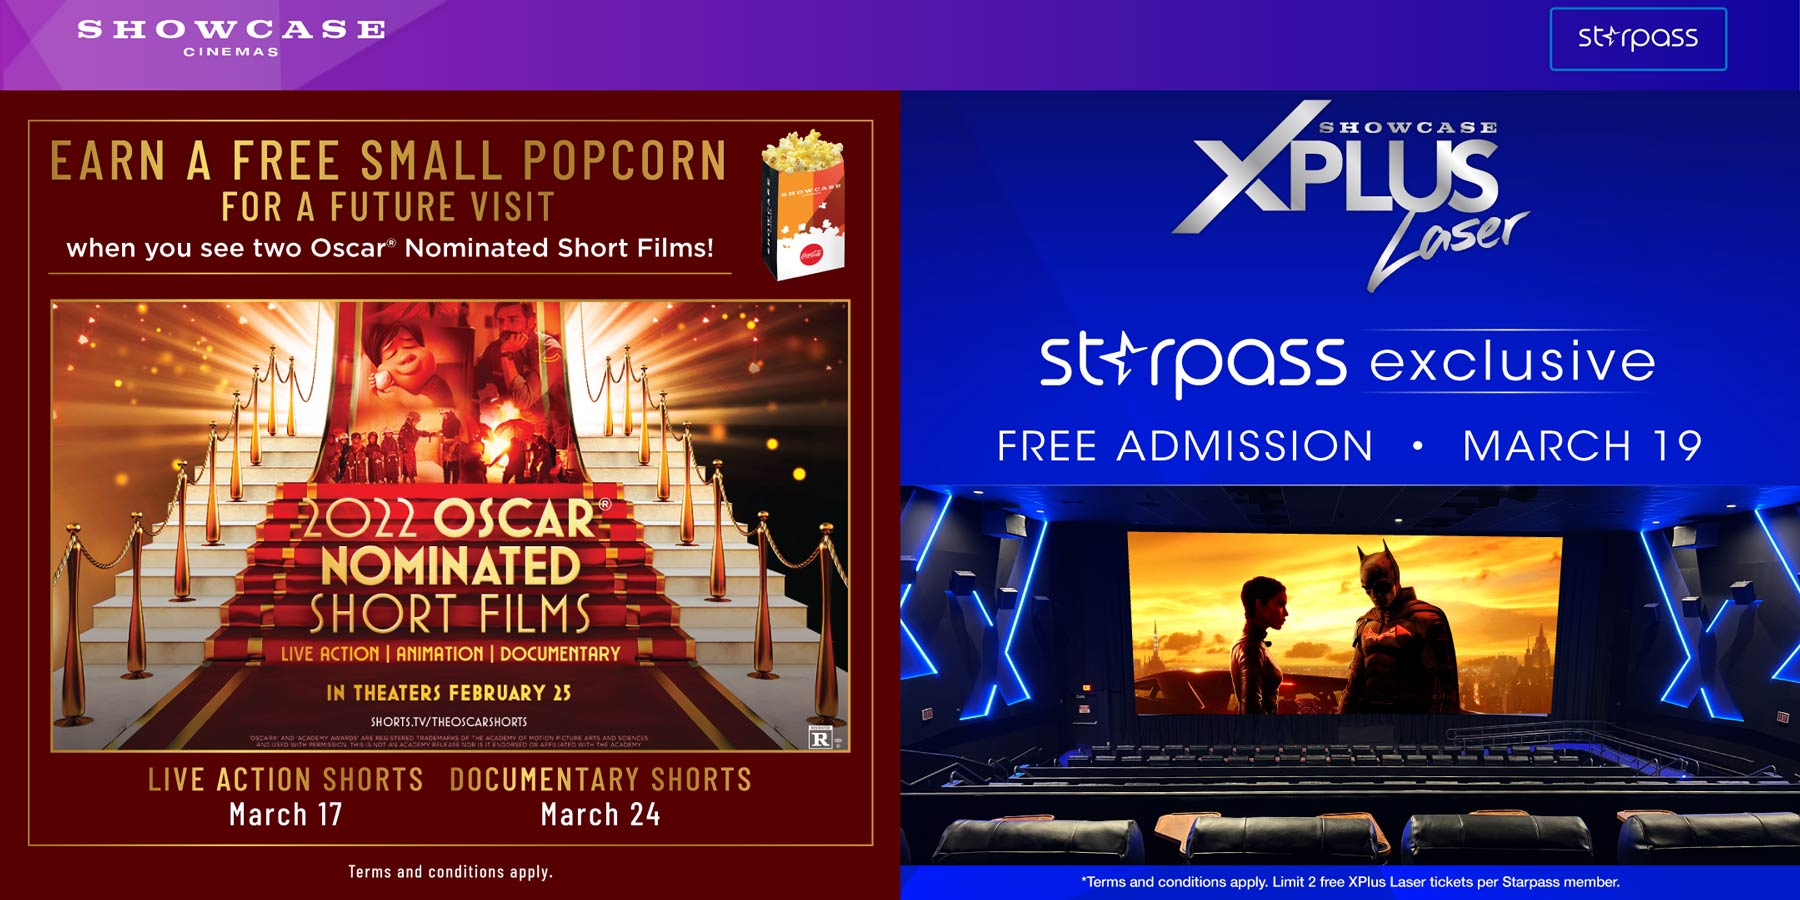 Showcase Cinemas stores Coupon  Free popcorn on 2 short film viewings & free admission for starpass members today at Showcase Cinemas #showcasecinemas 